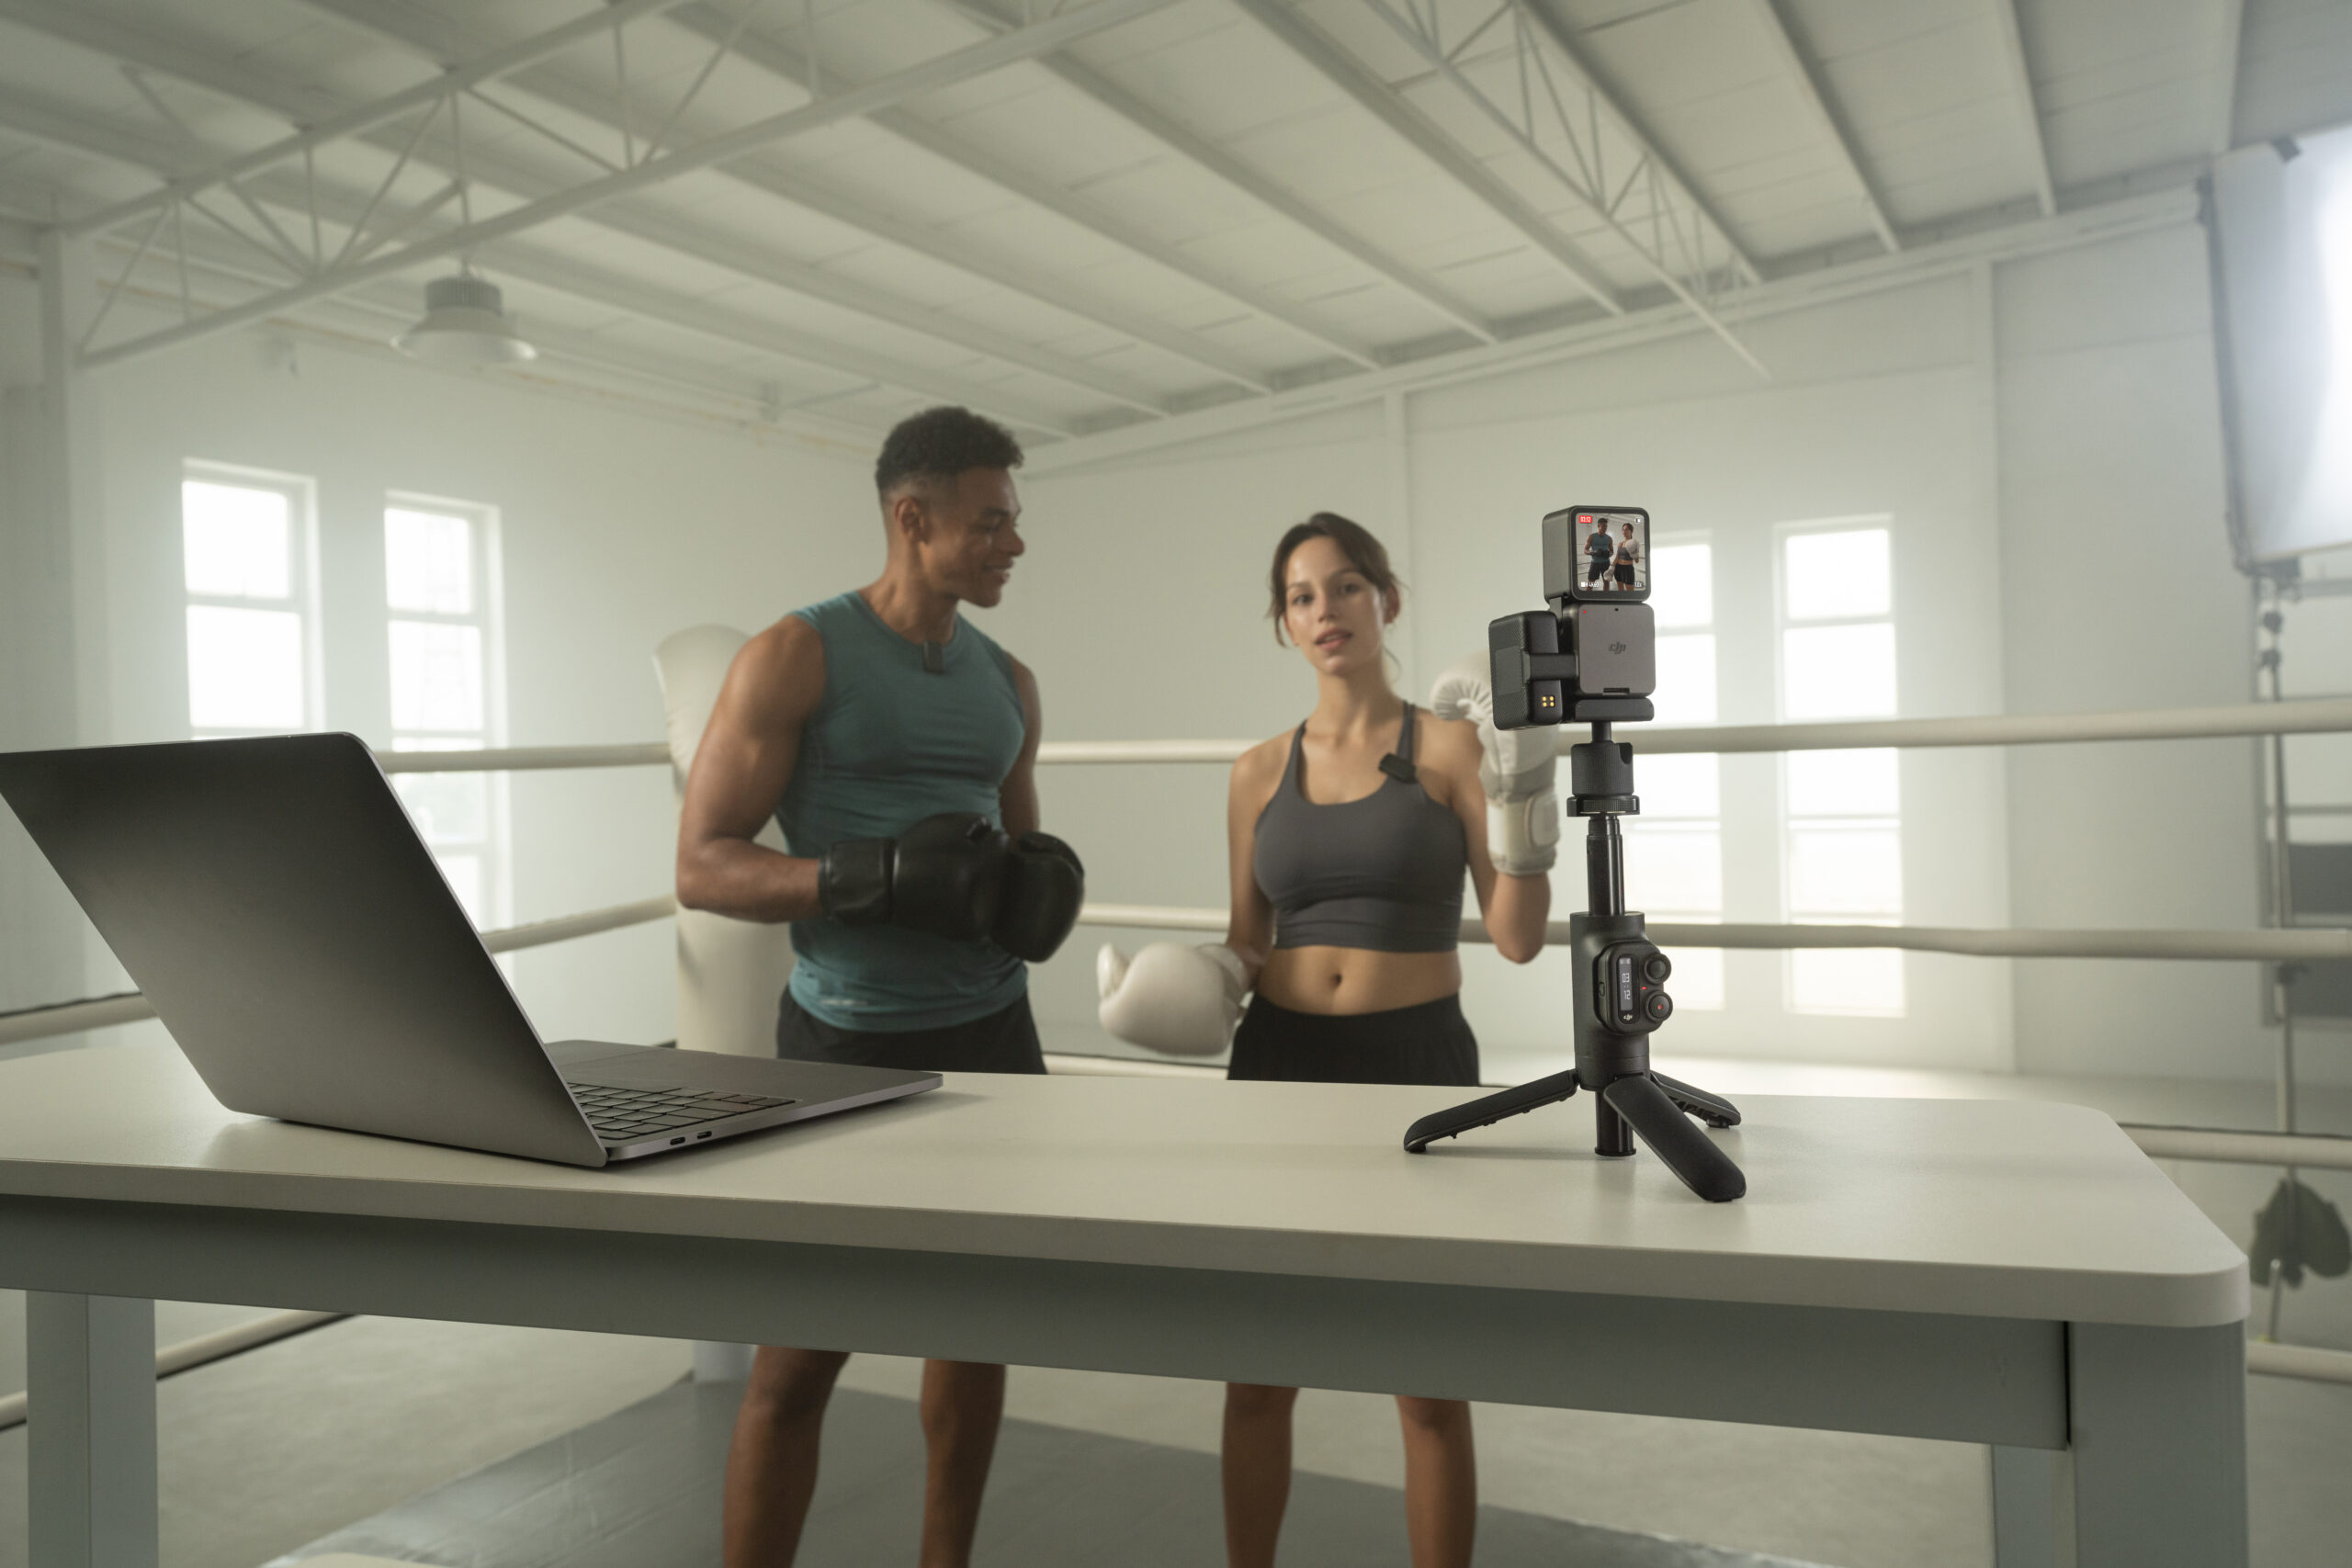 DJI Action 2 Gym 12 on scale DJI takes over, with new magnetic camera system